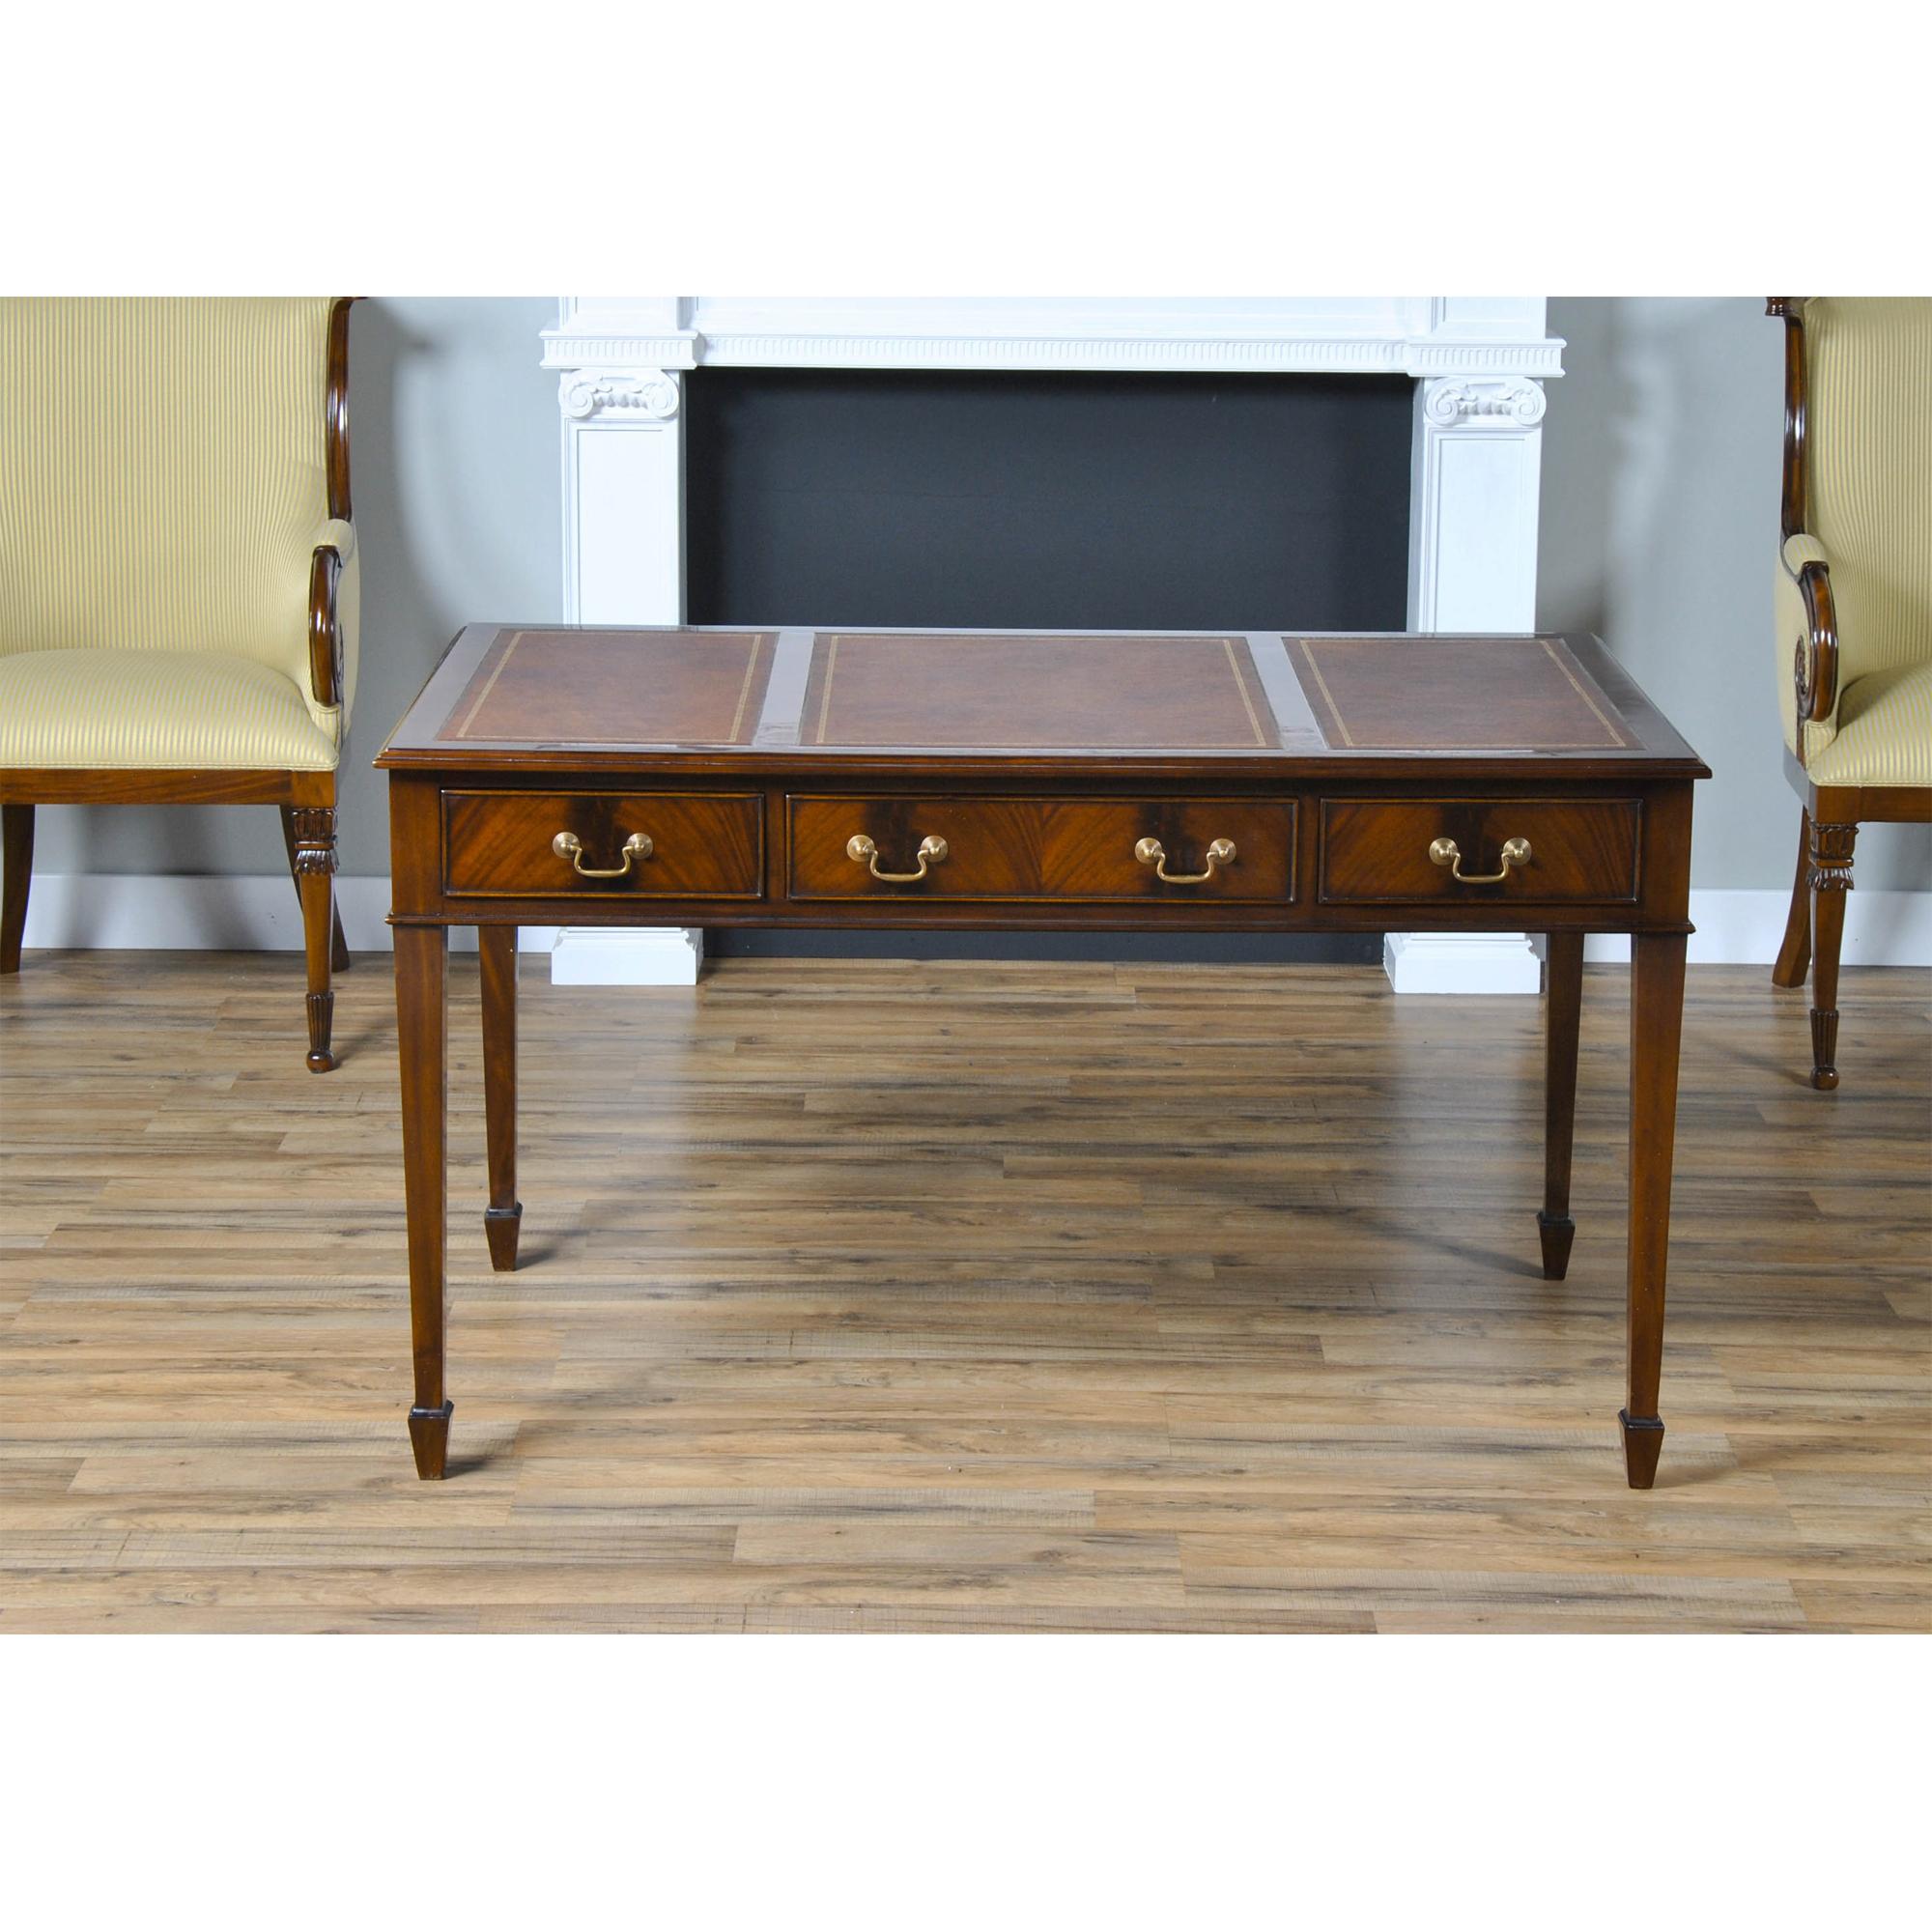 An elegant Mahogany Writing Table by Niagara Furniture which is a perfect fit for use either at home or in the office. Features include a three panel brown genuine leather tooled top, made from full grain genuine leather, solid mahogany molded edge